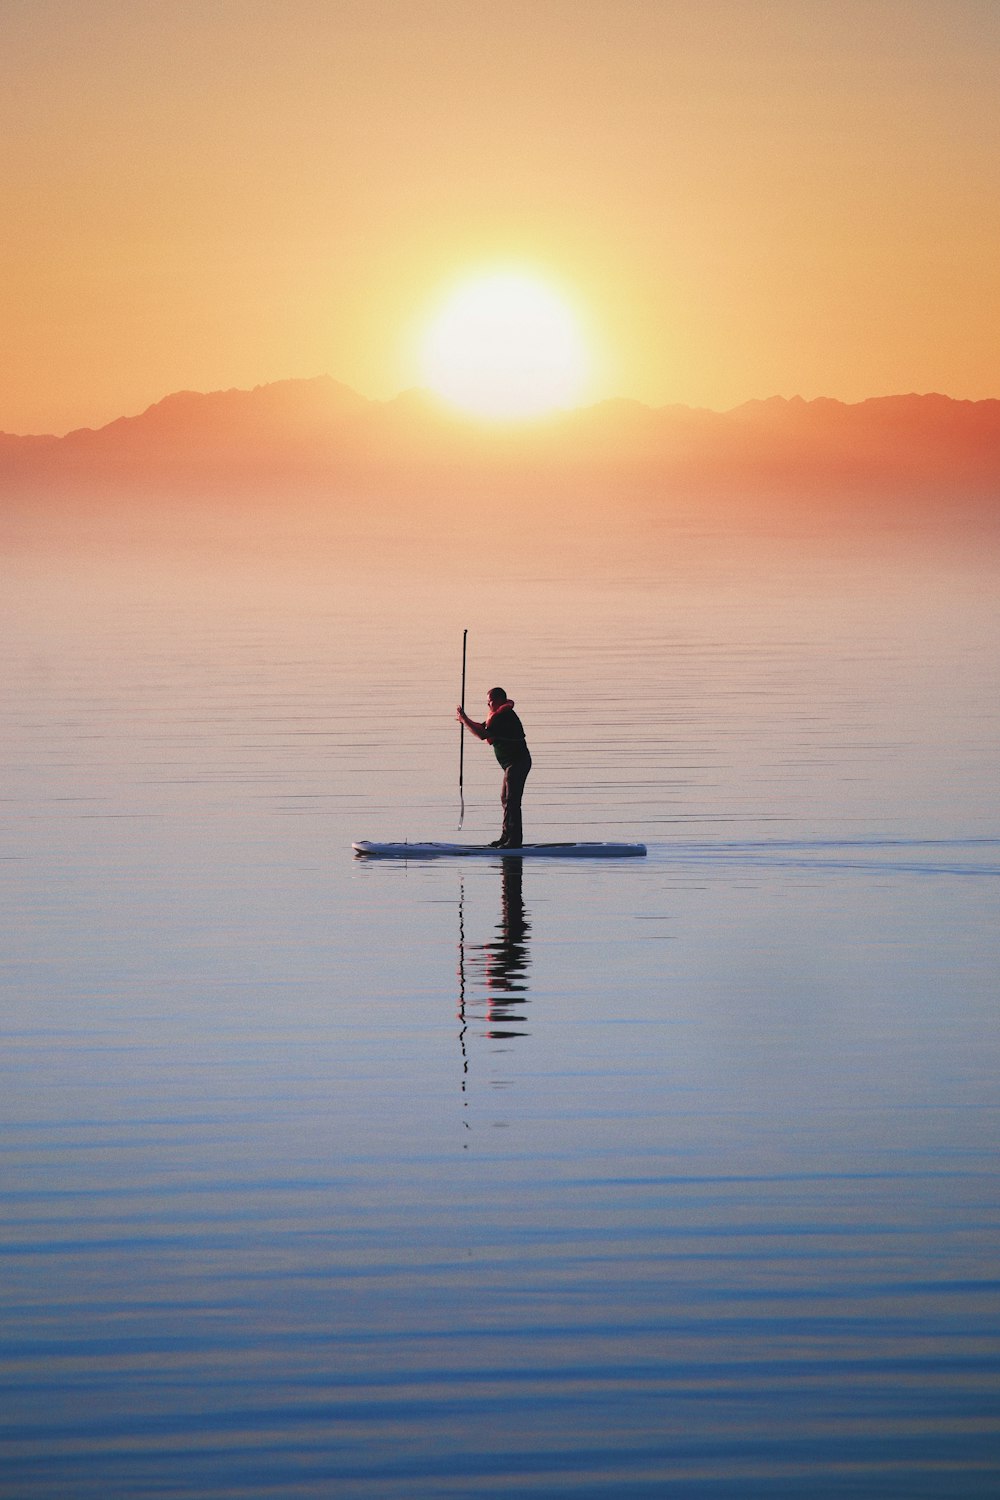 a person on a paddle board in the water